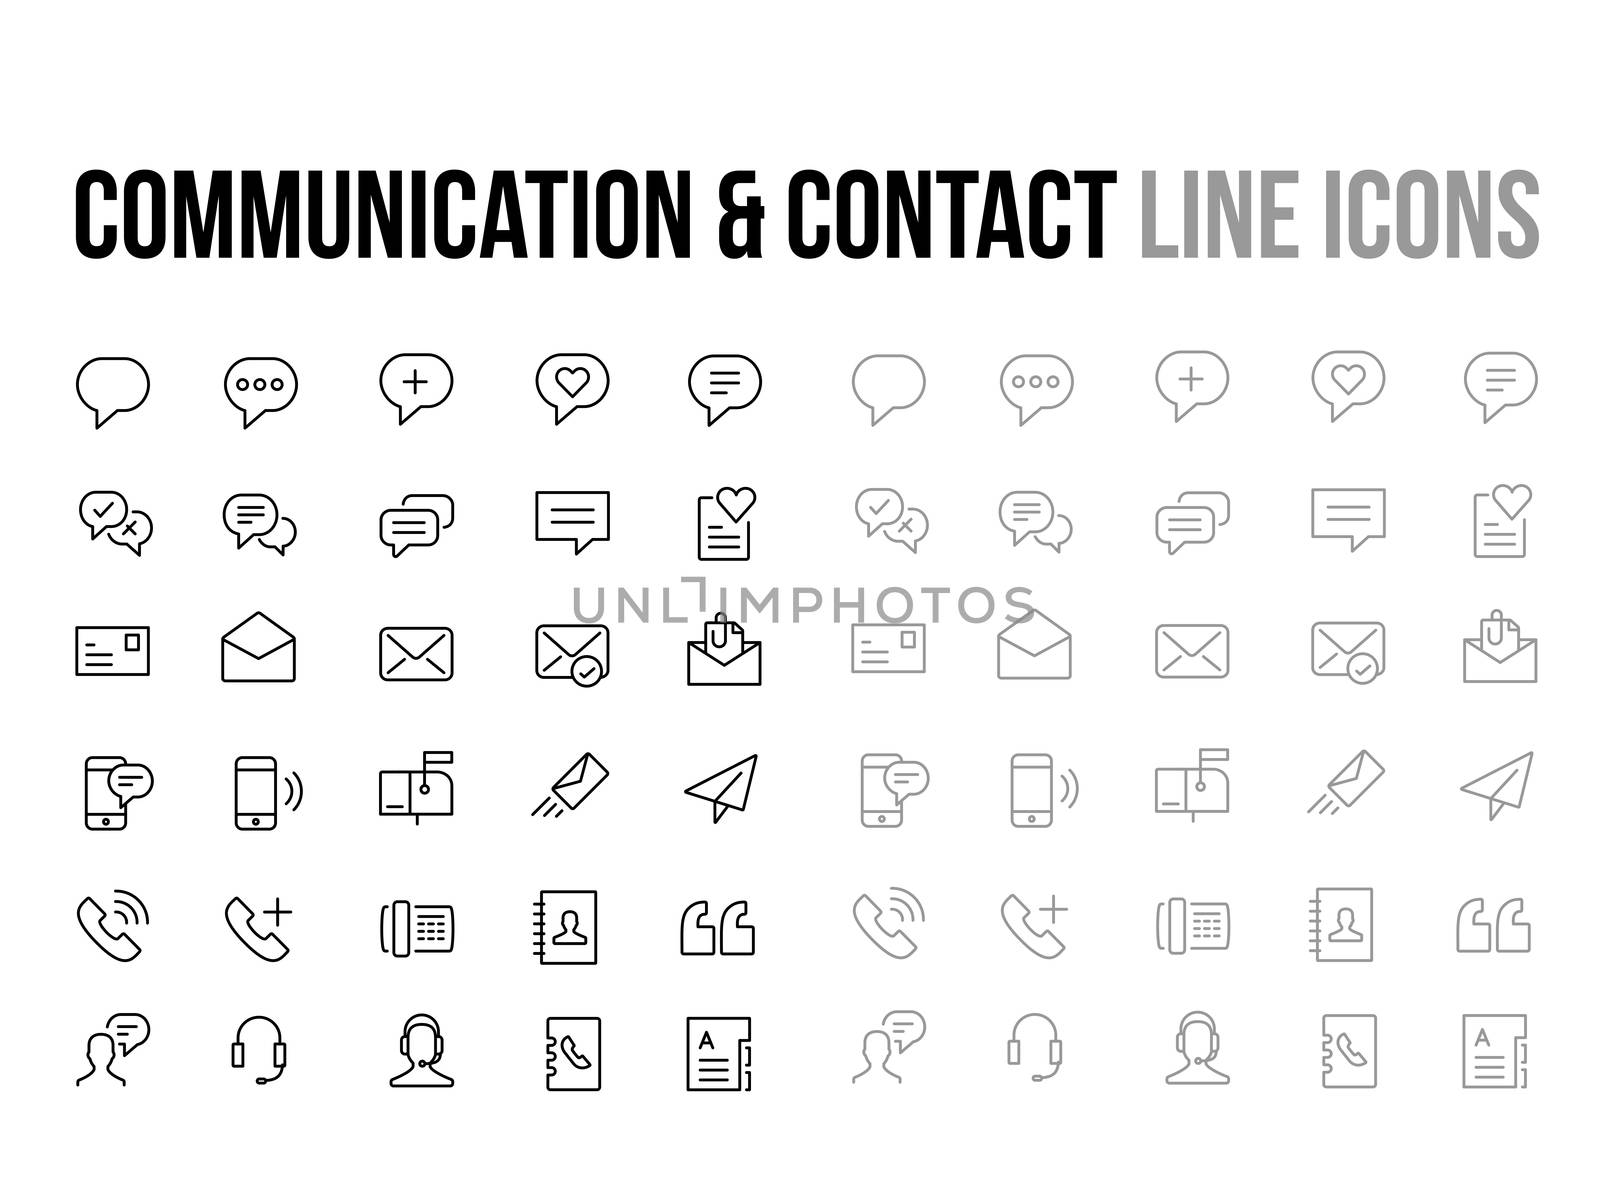 Customer support, contact, messaging, communication vector thin icons by cougarsan